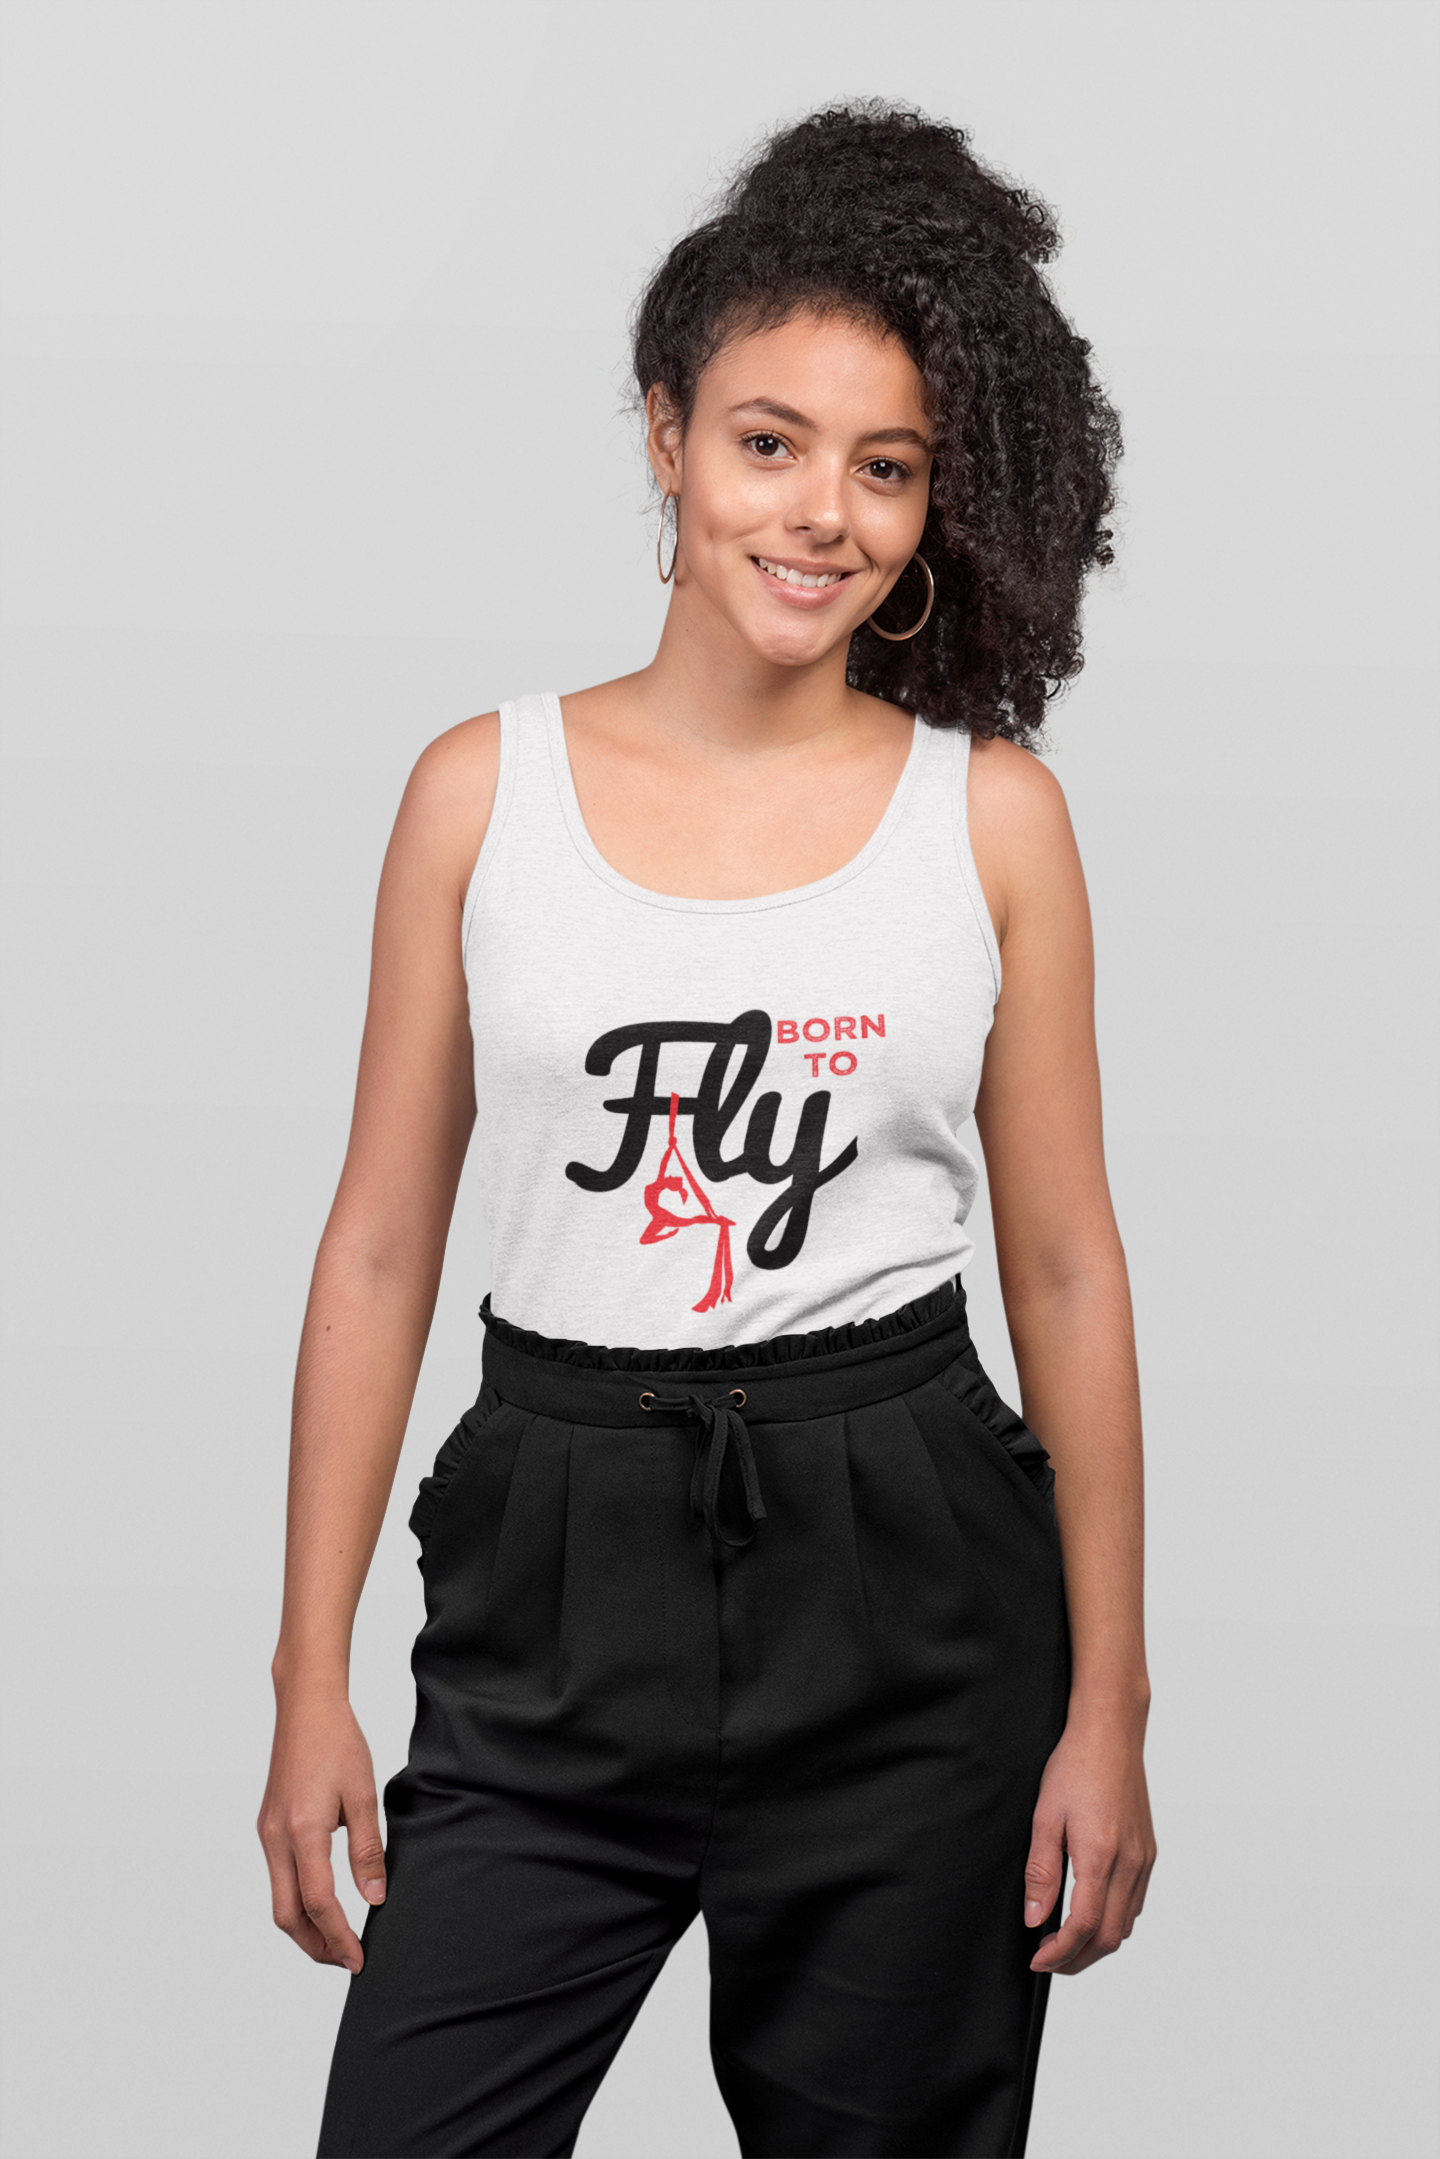 Born to Fly Tank Top - Uplift Active